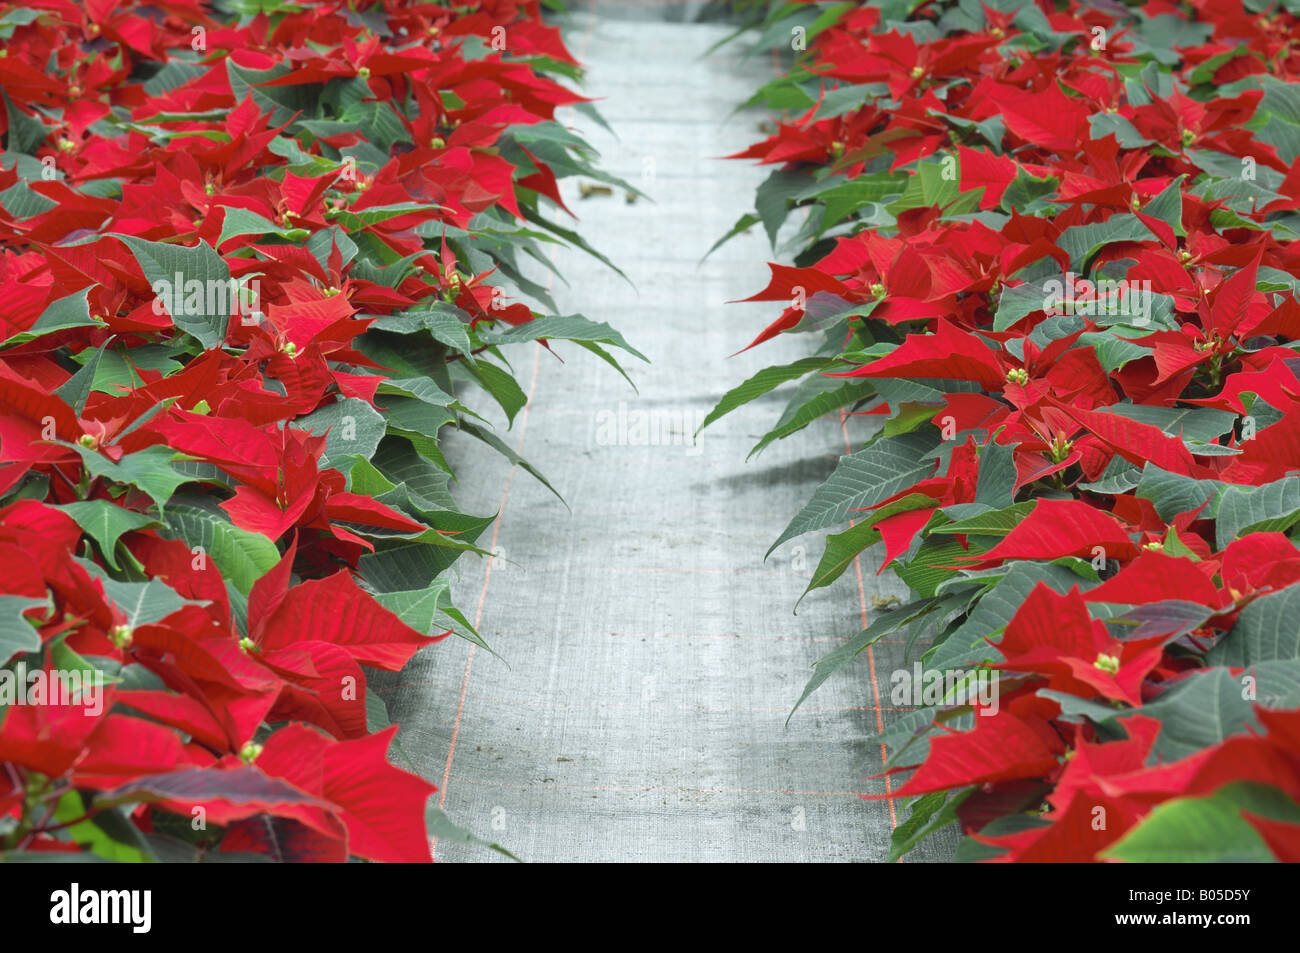 poinsettia (Euphorbia pulcherrima), plants with magnificent coloured bracts in a garden center Stock Photo